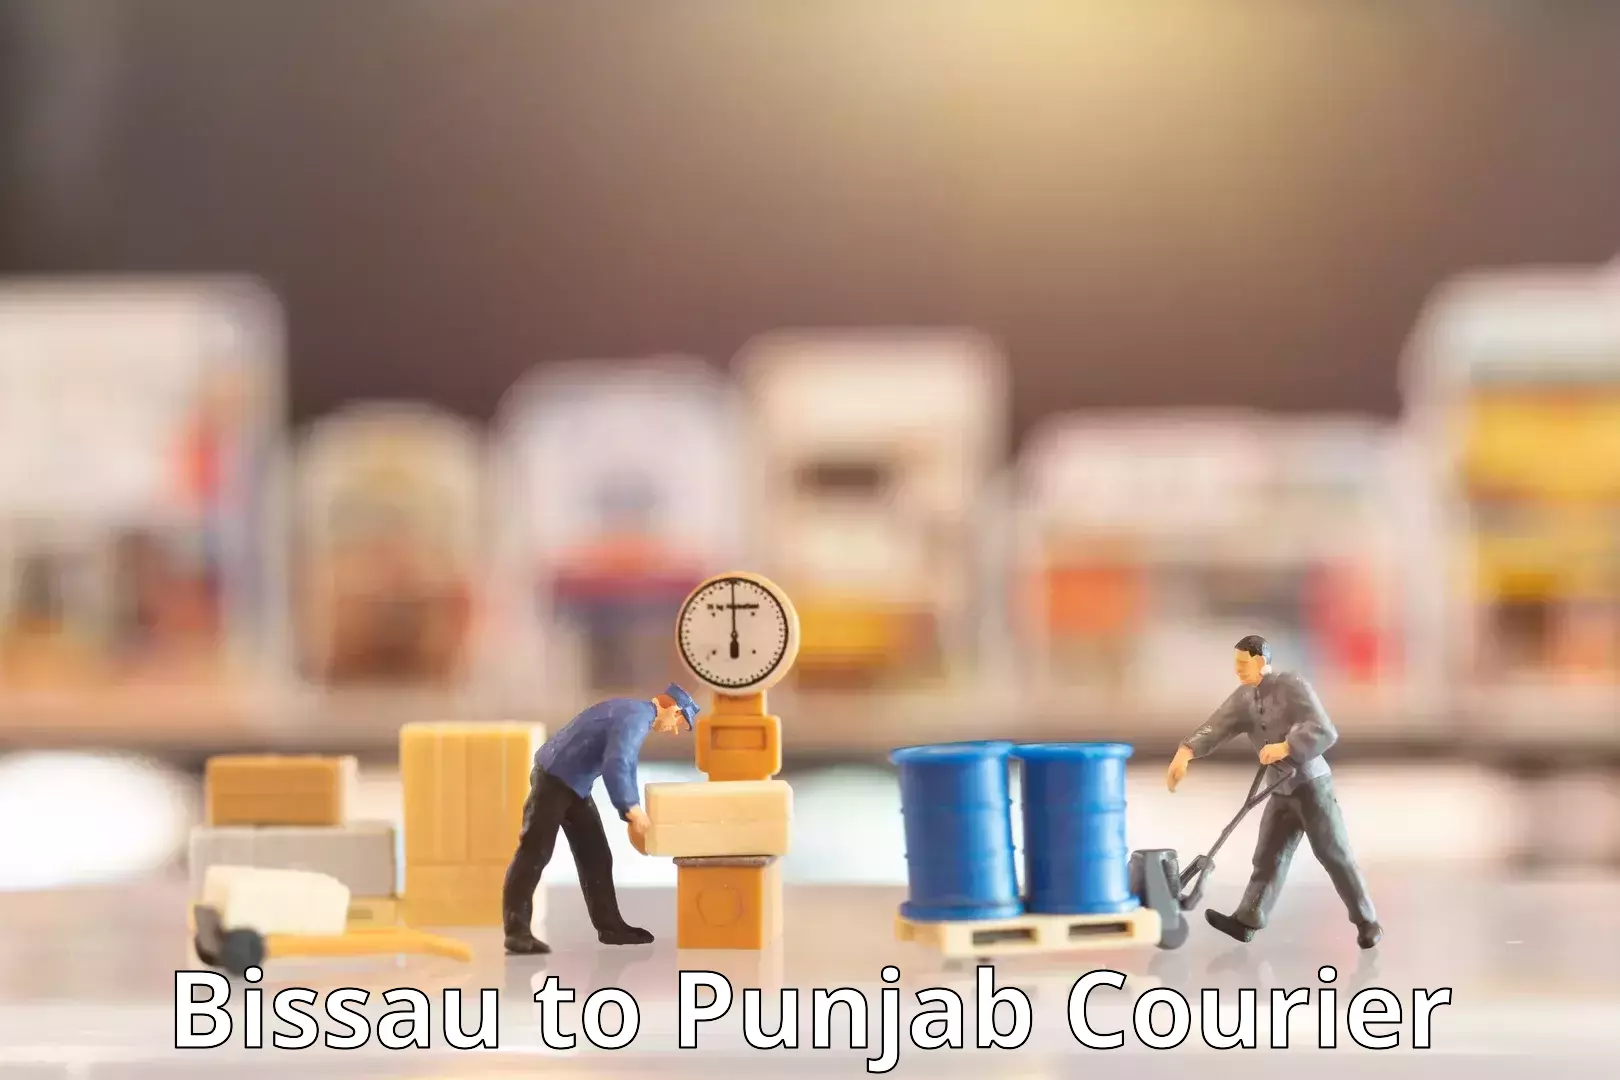 Sustainable delivery practices Bissau to Punjab